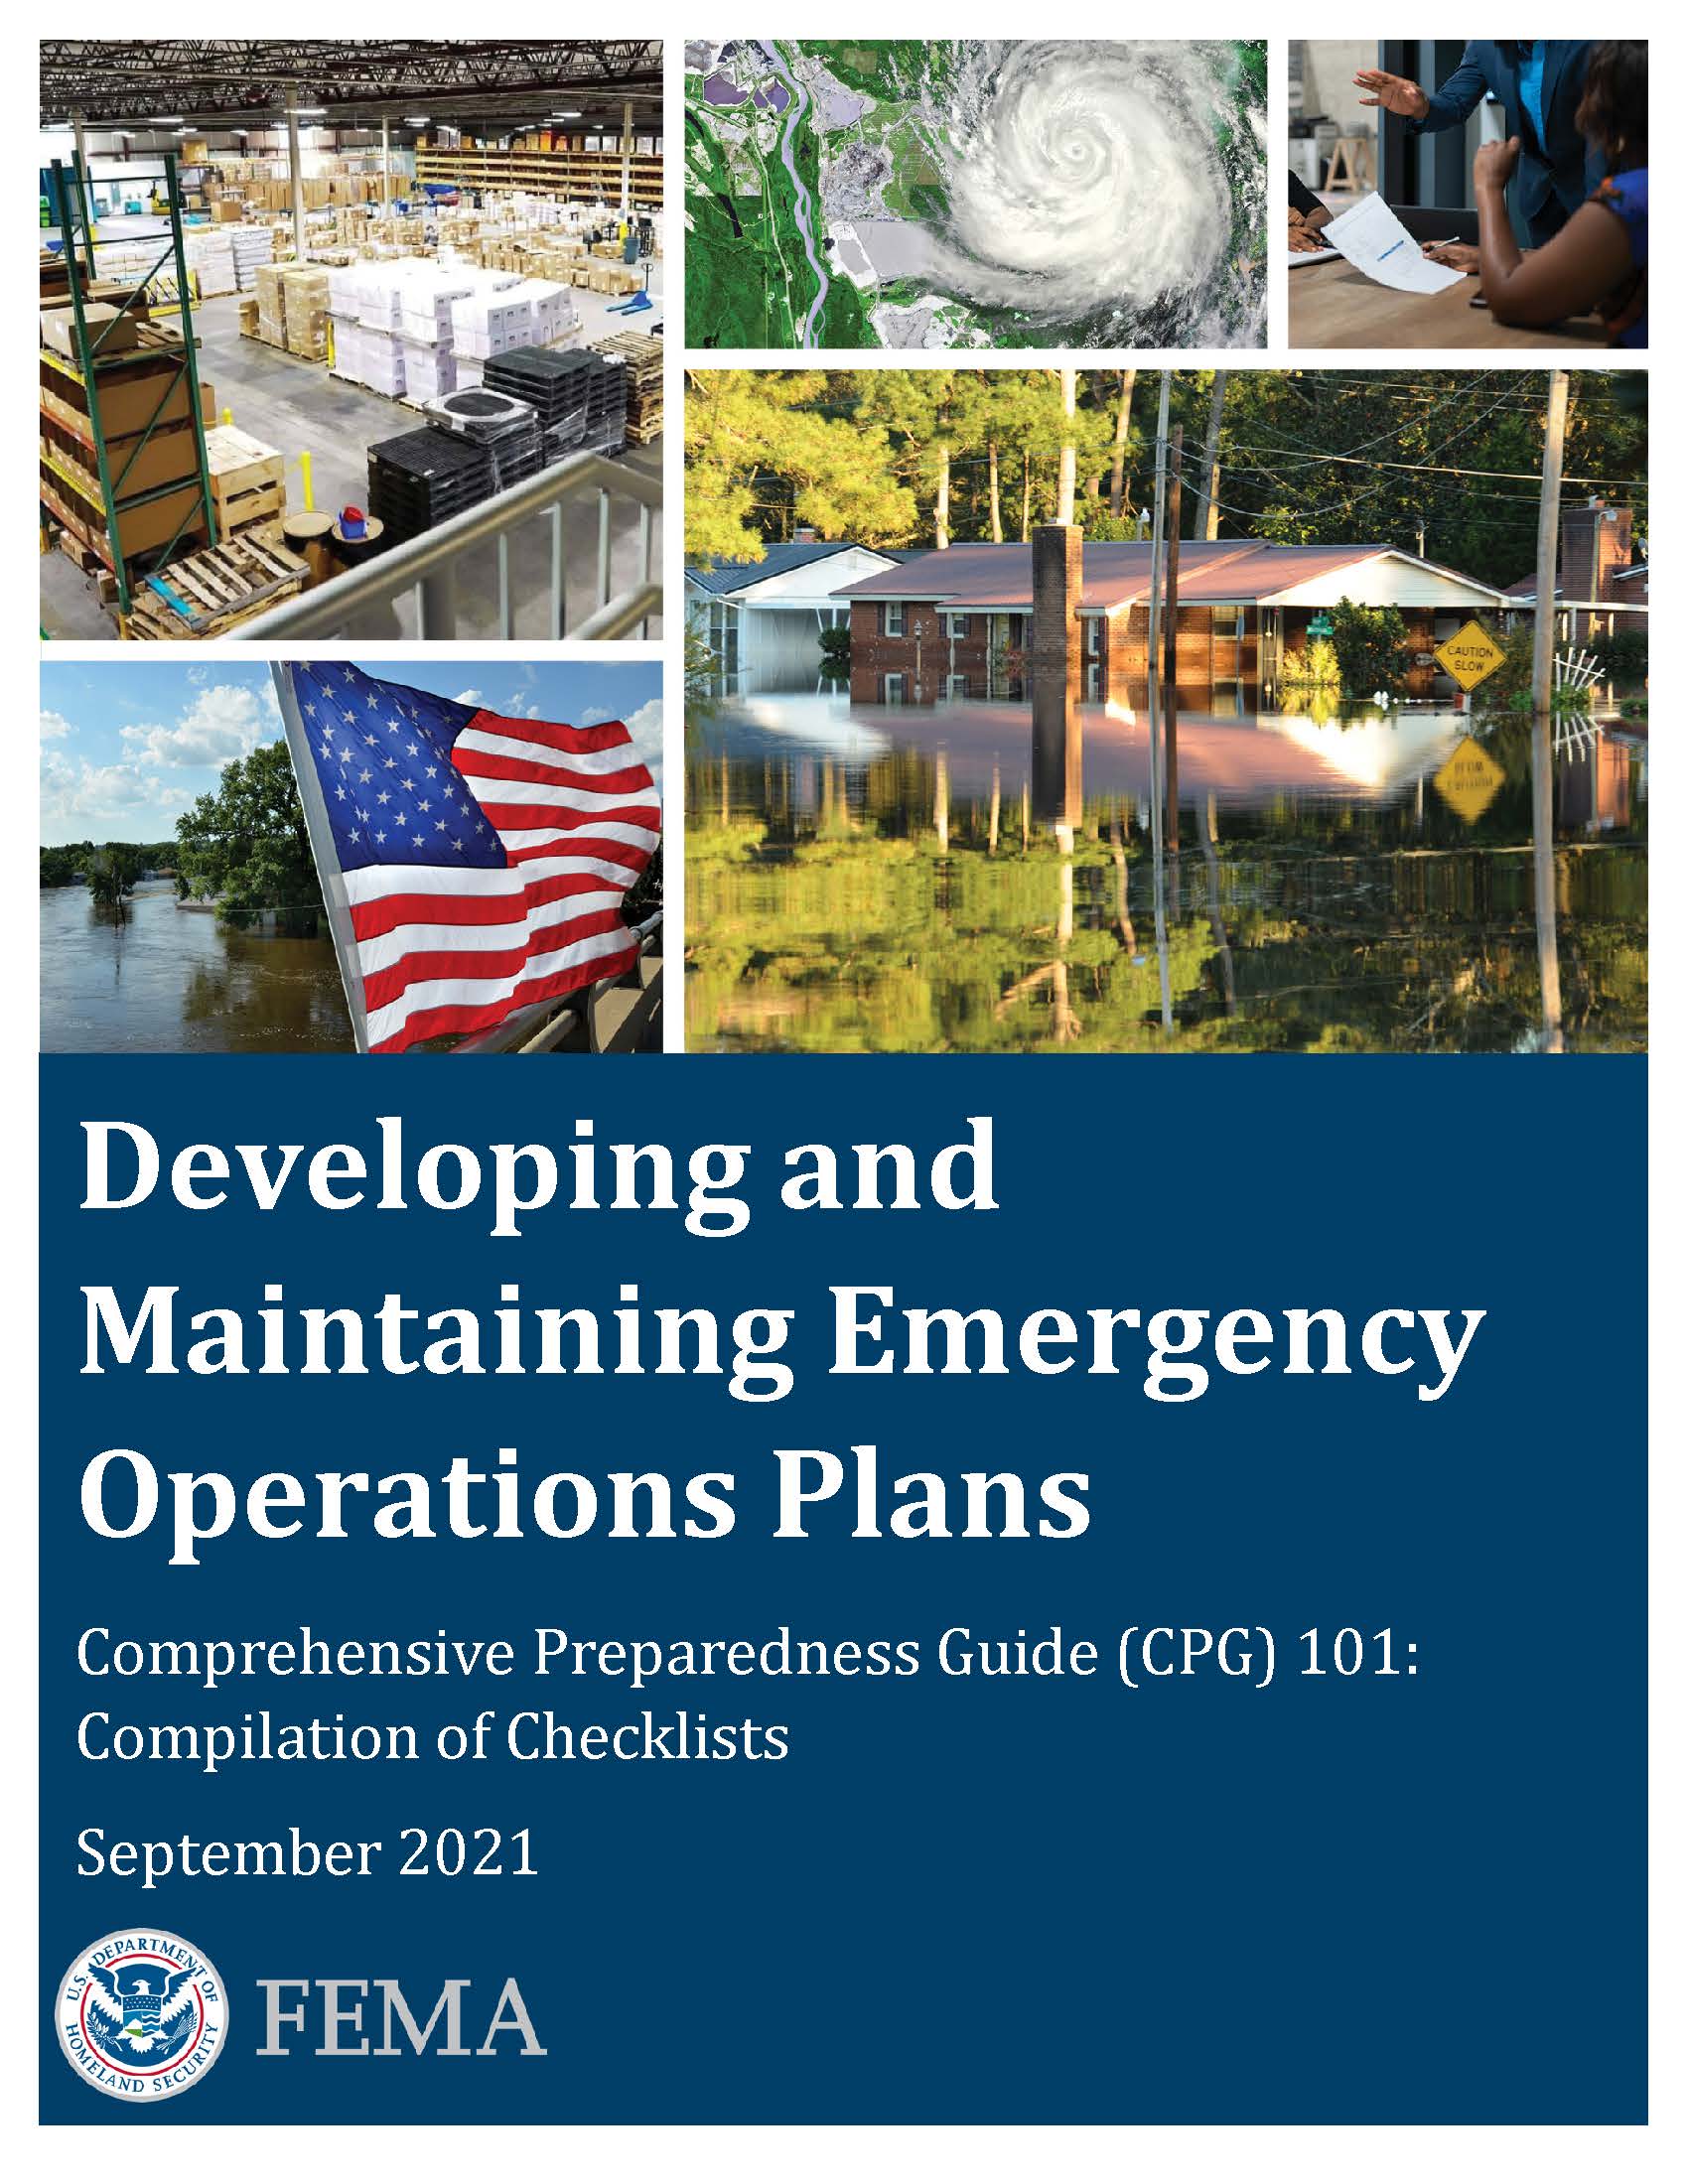 Comprehensive Preparedness Guide 101: Developing and Maintaining Emergency Operations Plans Coverpage